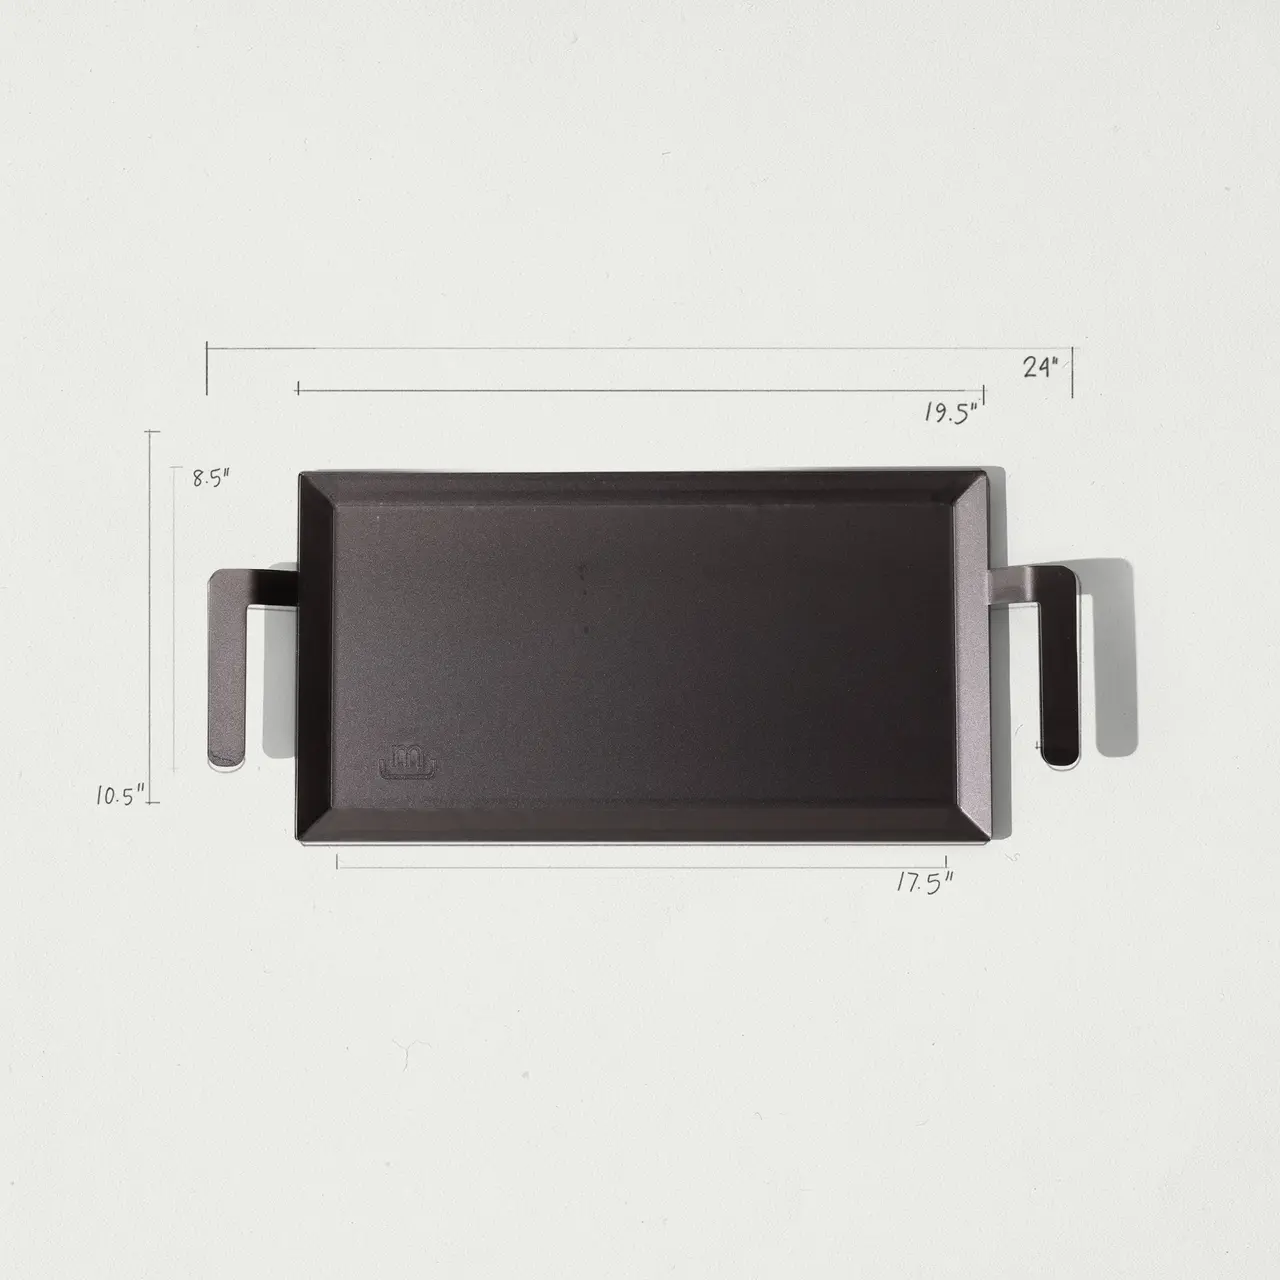 A rectangular griddle with handles is shown with dimensions labeled on each side.